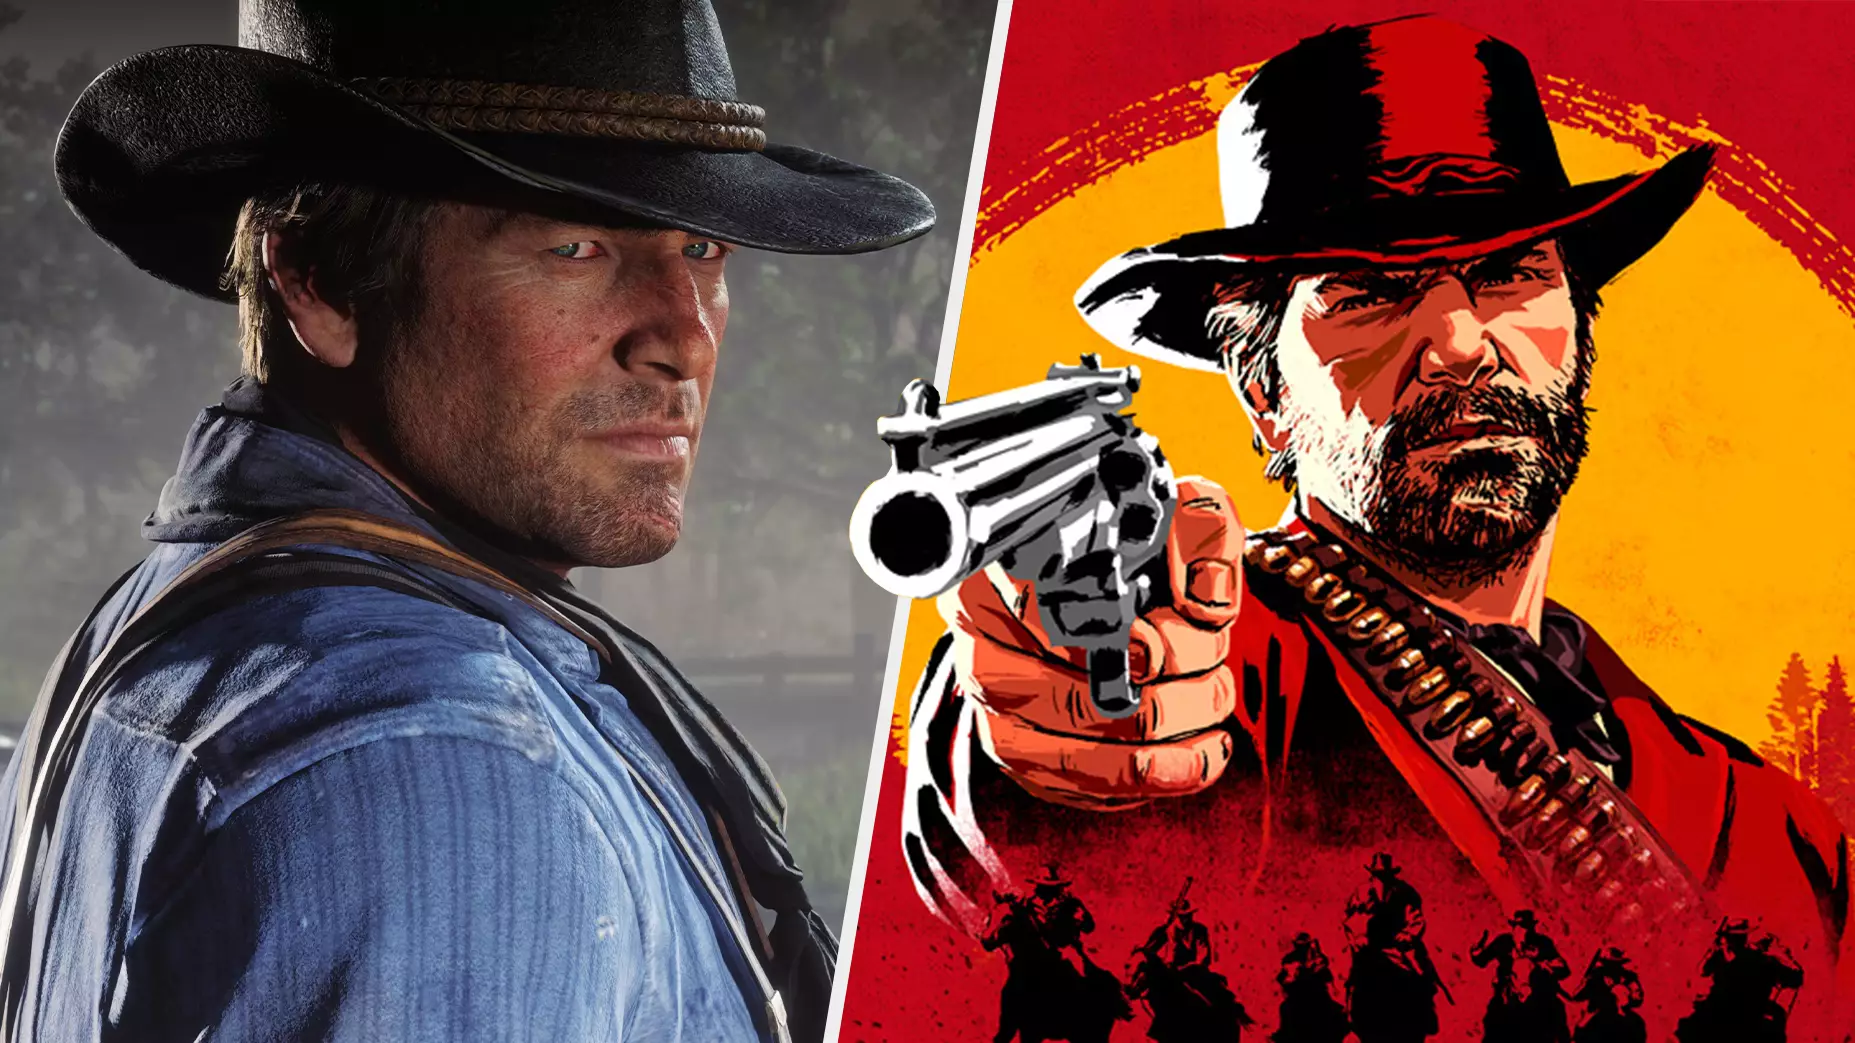 'Red Dead Redemption 2' Players Have Only Just Noticed The Inspiration Behind Game's Cover